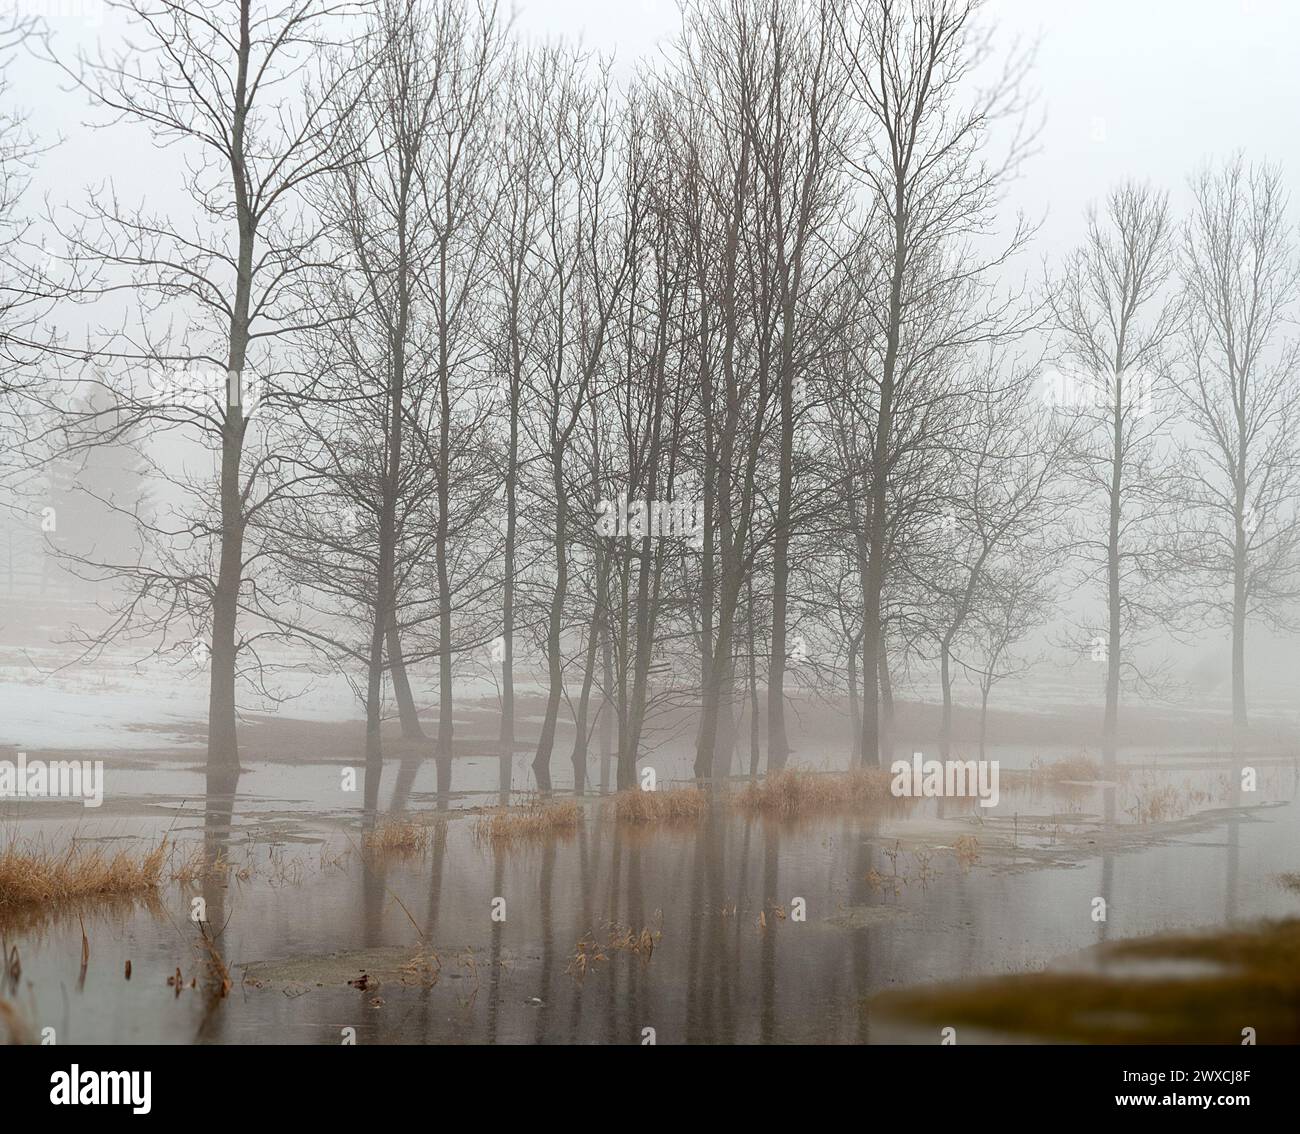 Tall trees in flooded field. Stock Photo